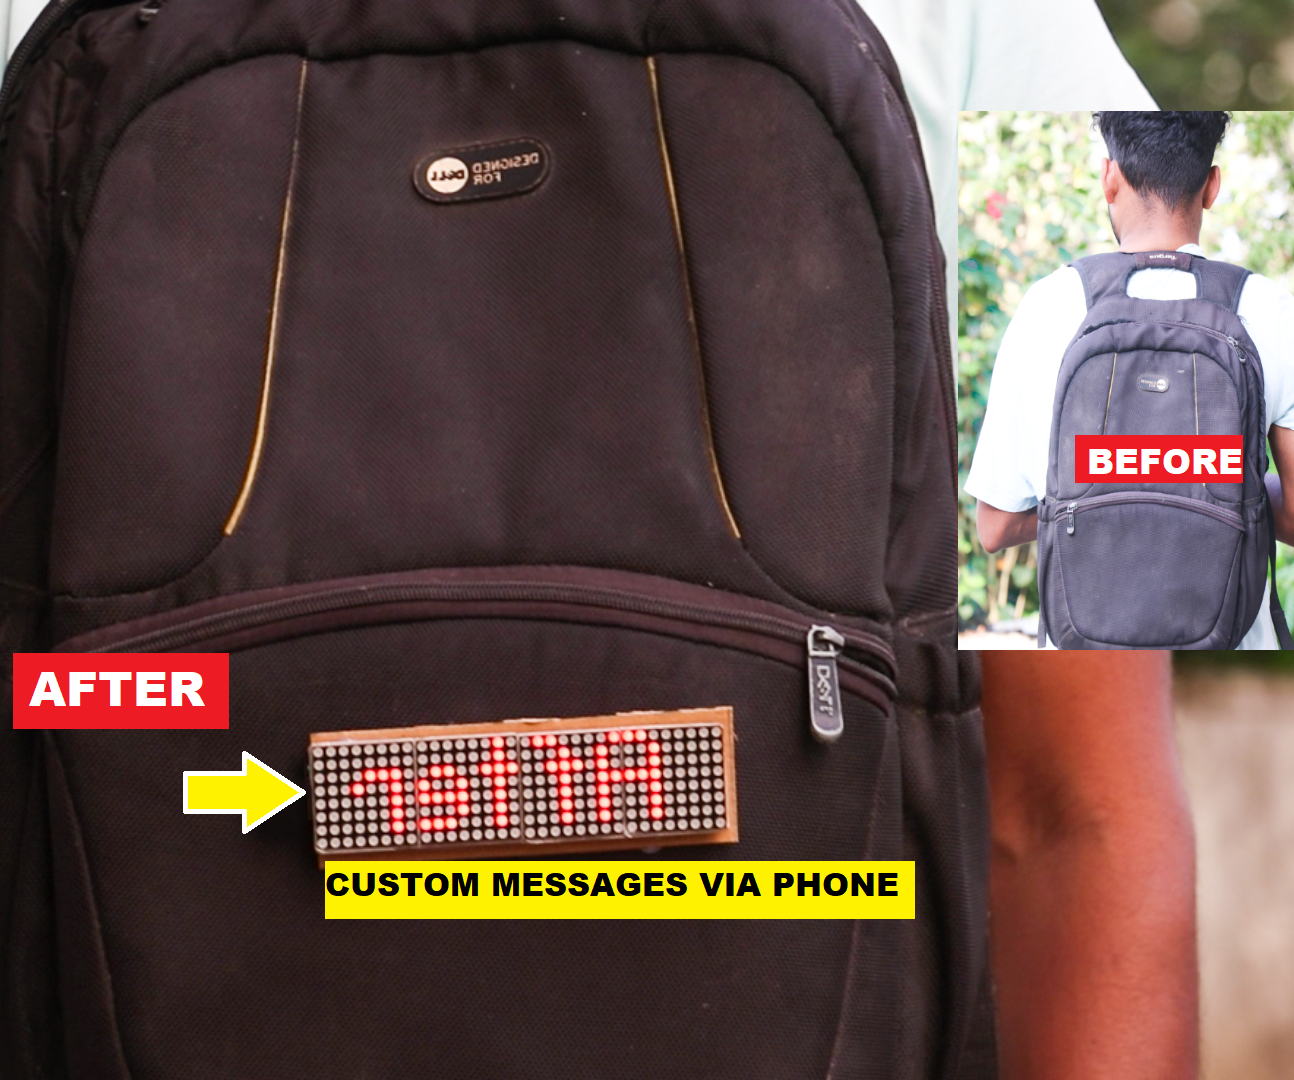 LED Backpack With Programmable LED Display